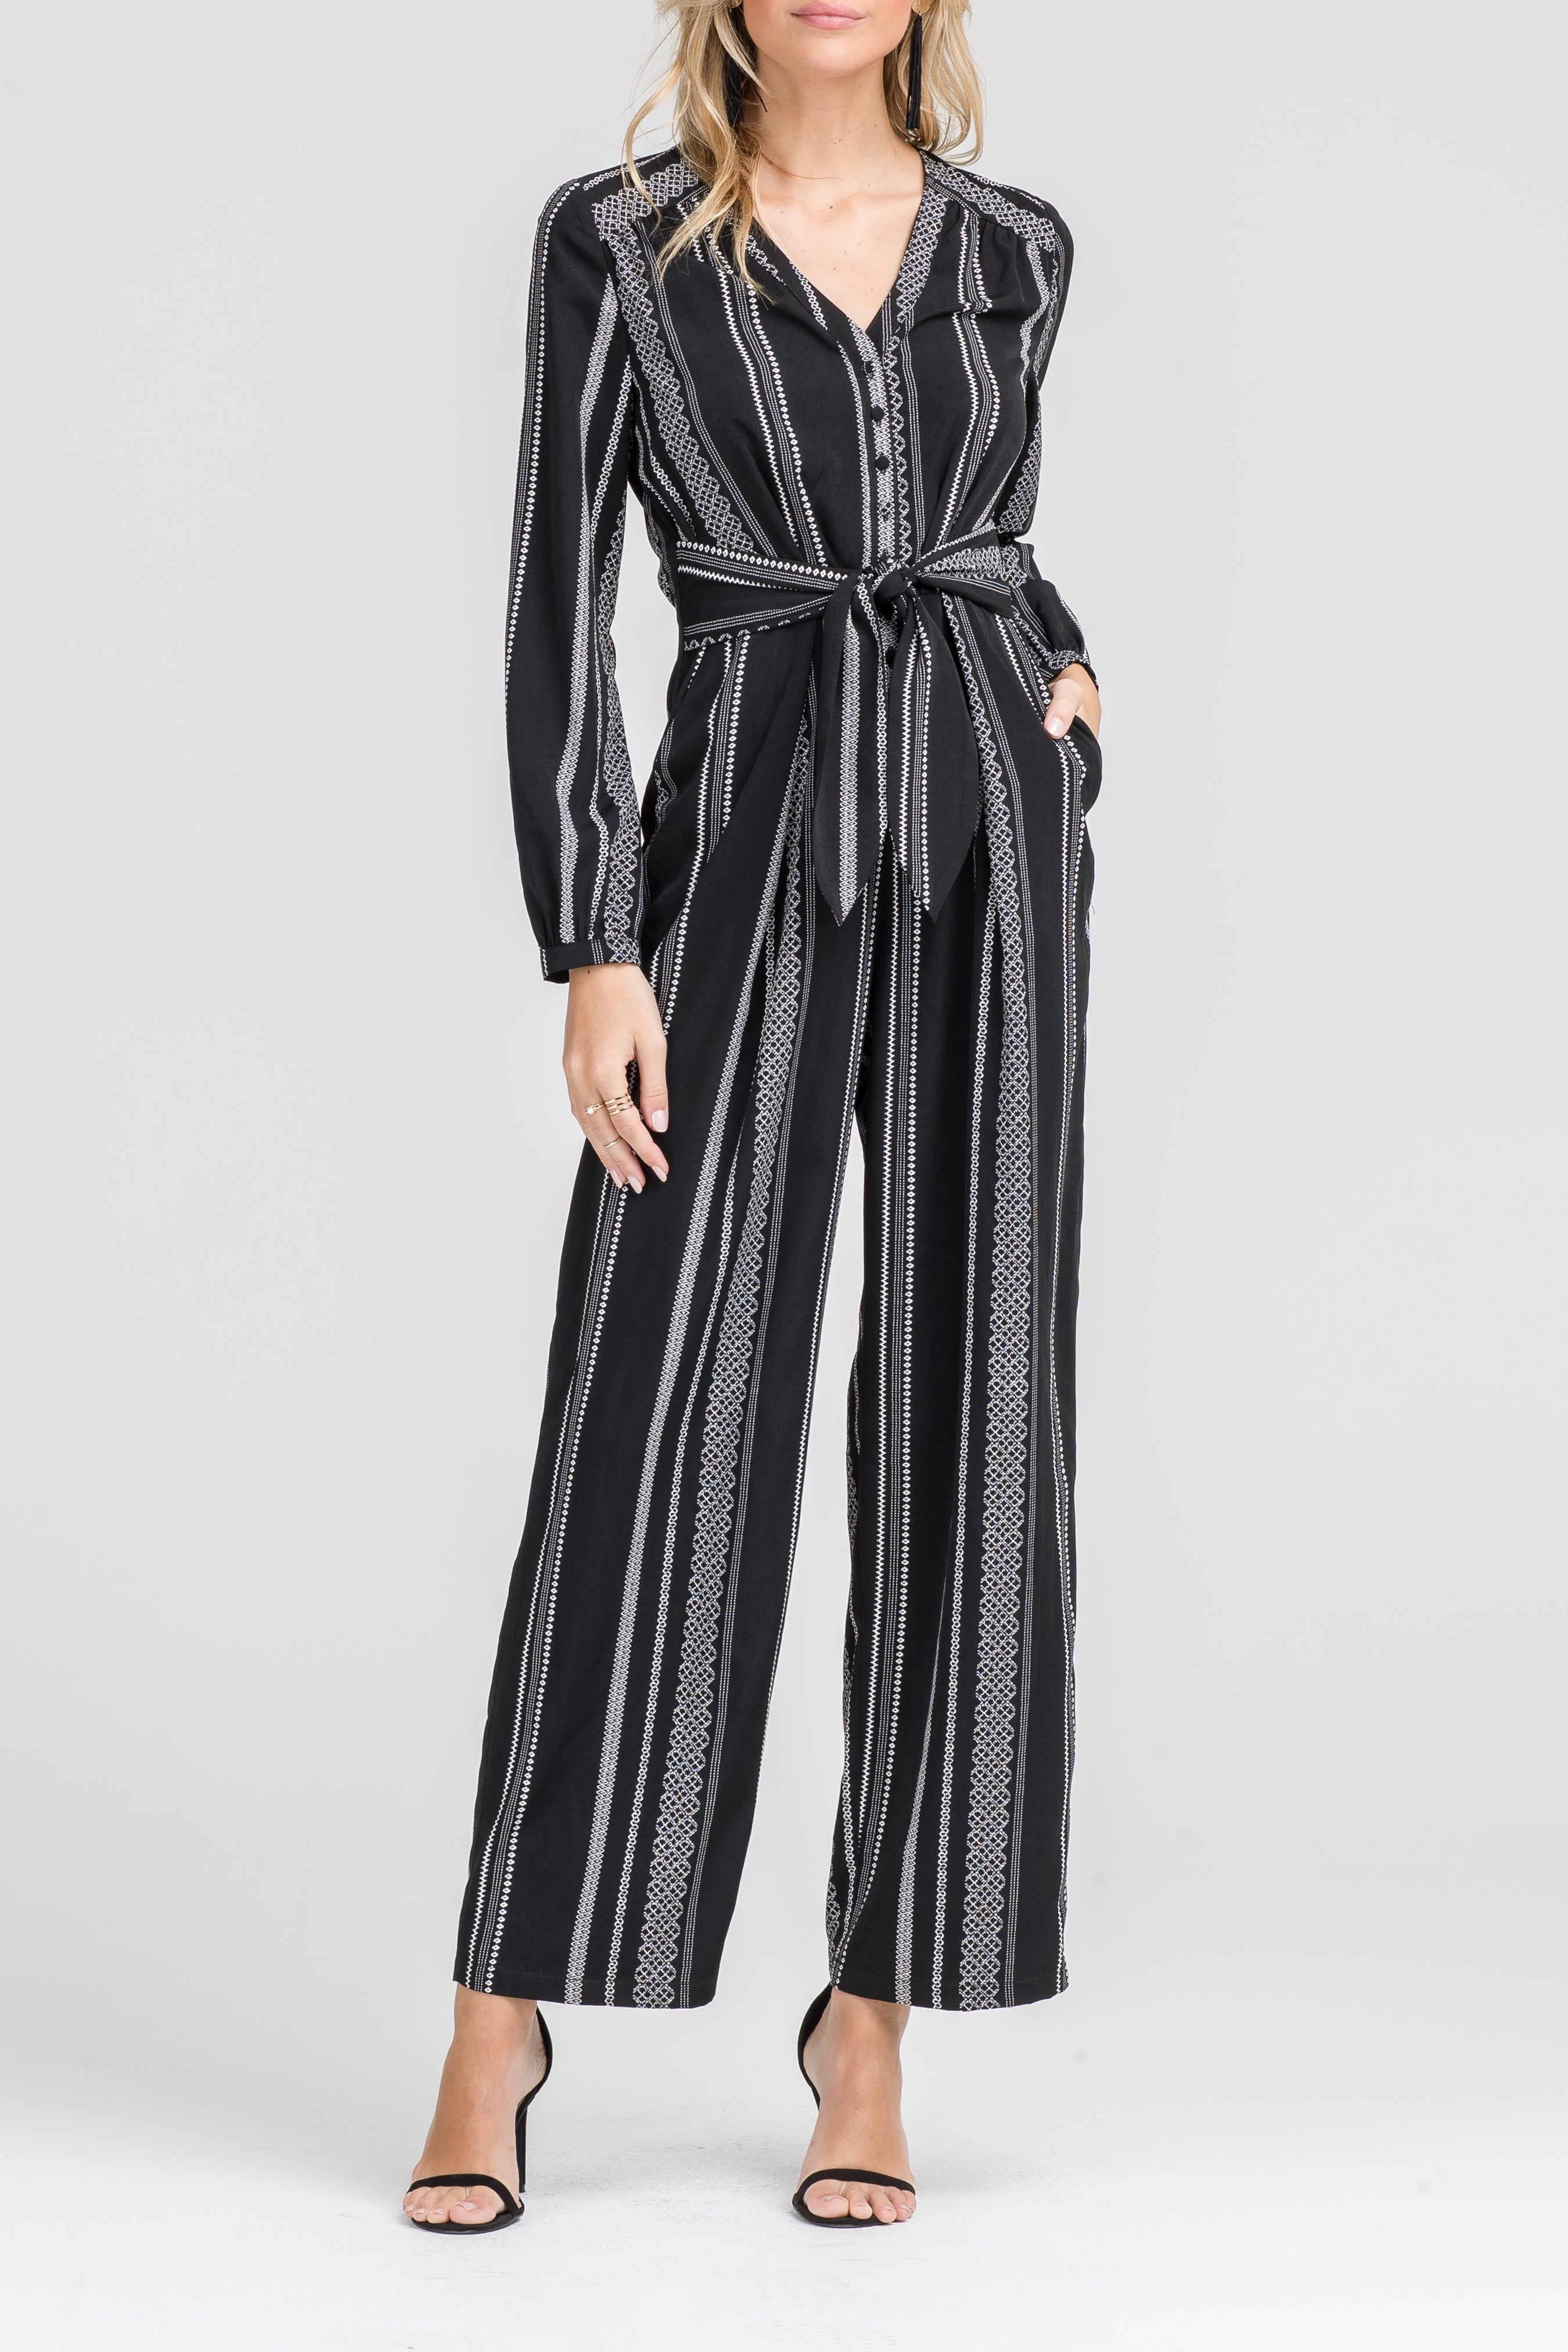 Fashion Black Stripe Contrast Tie-Up Jumpsuit with Long Sleeve